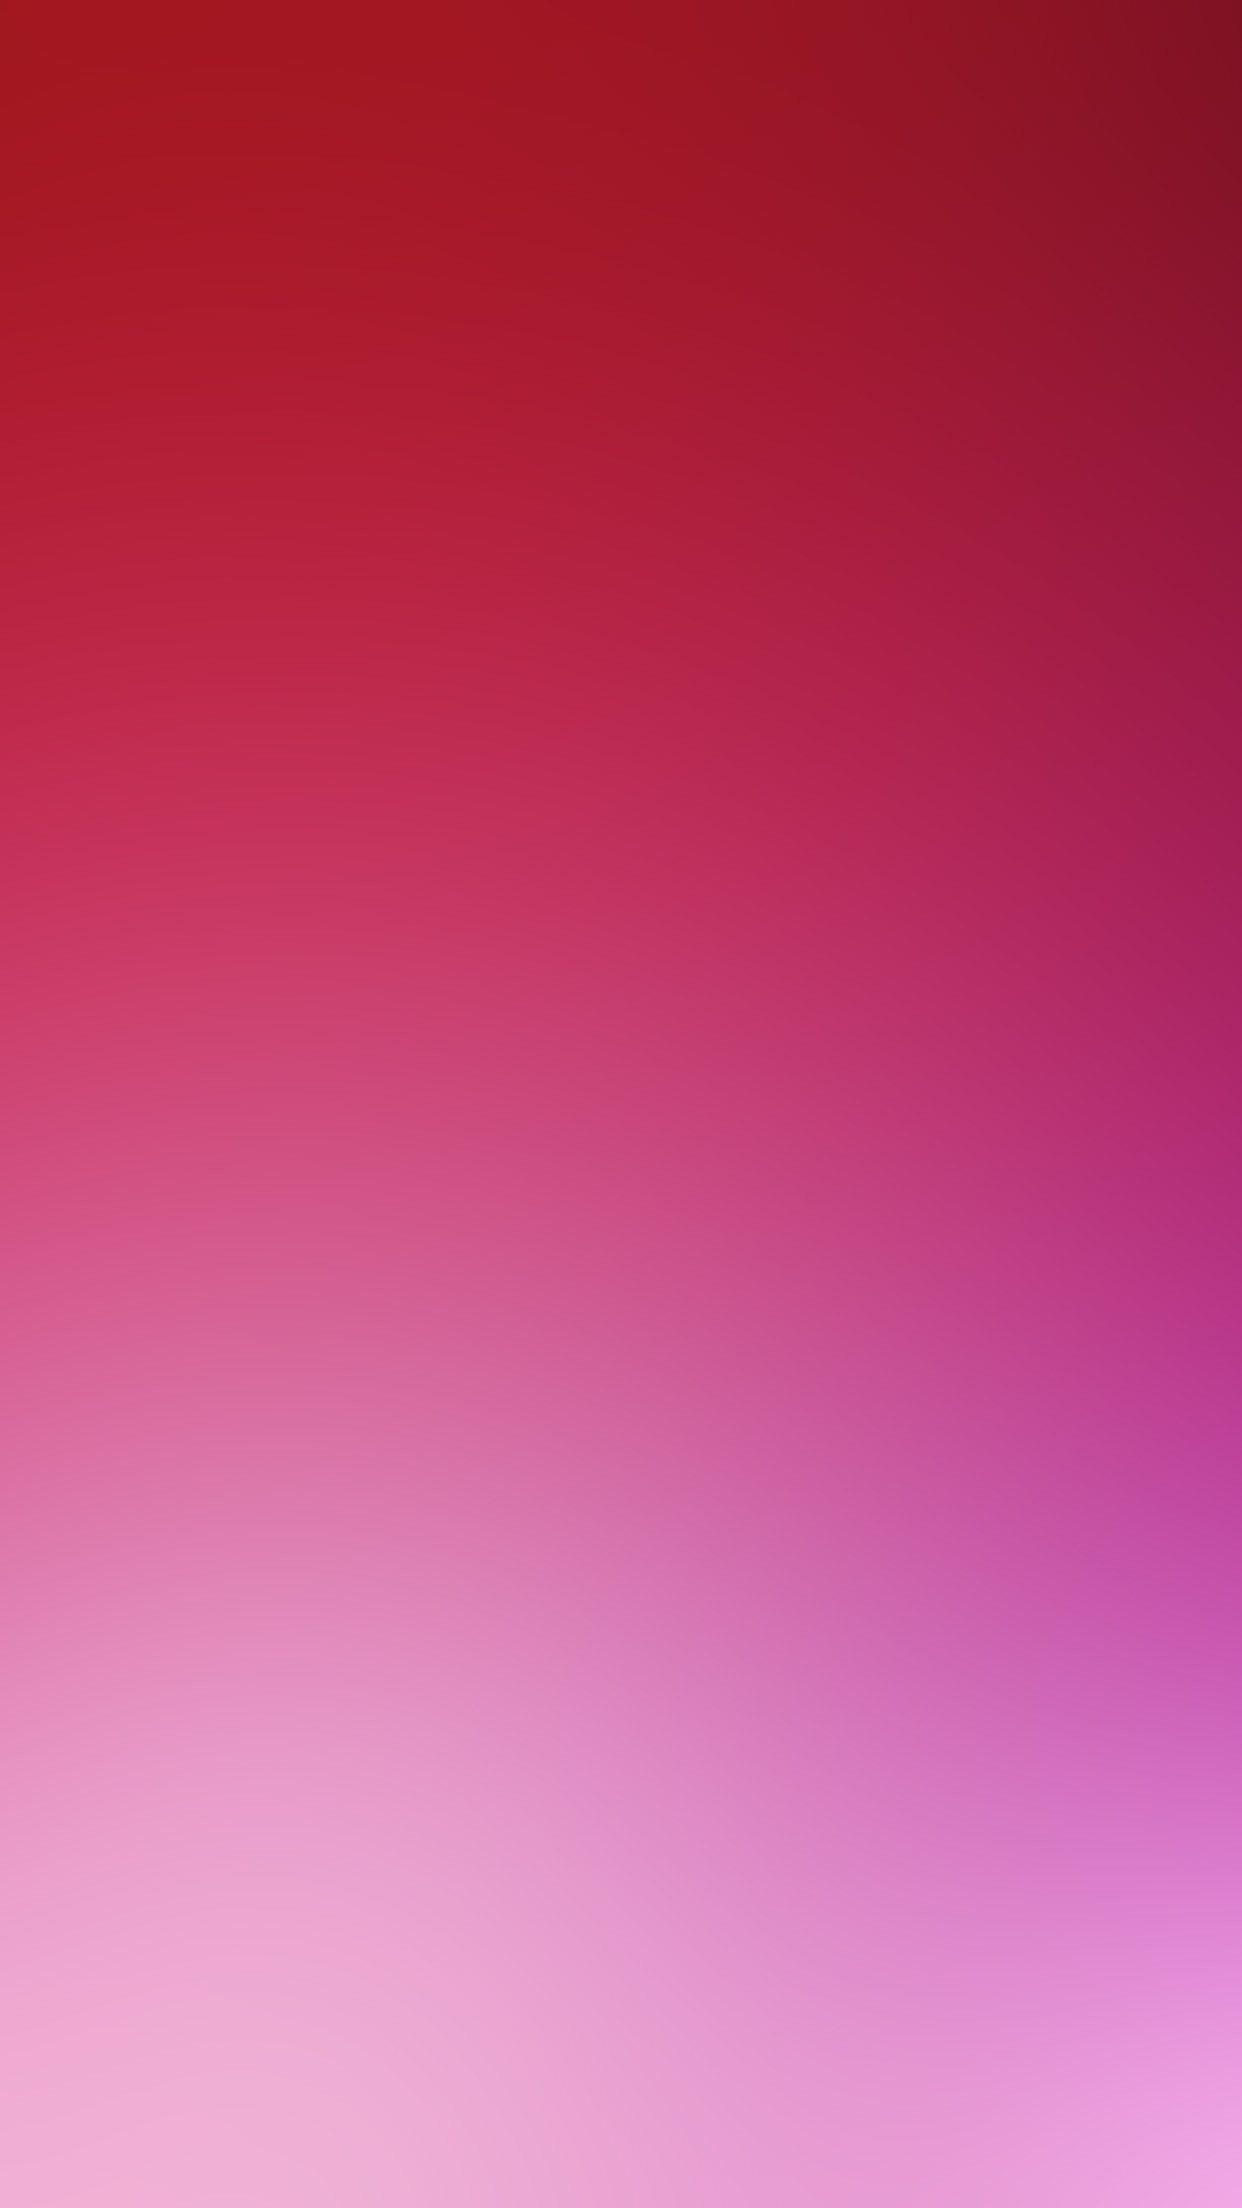 1242x2208 Plus Red Wallpaper Apple iPhone 6 - Bing images